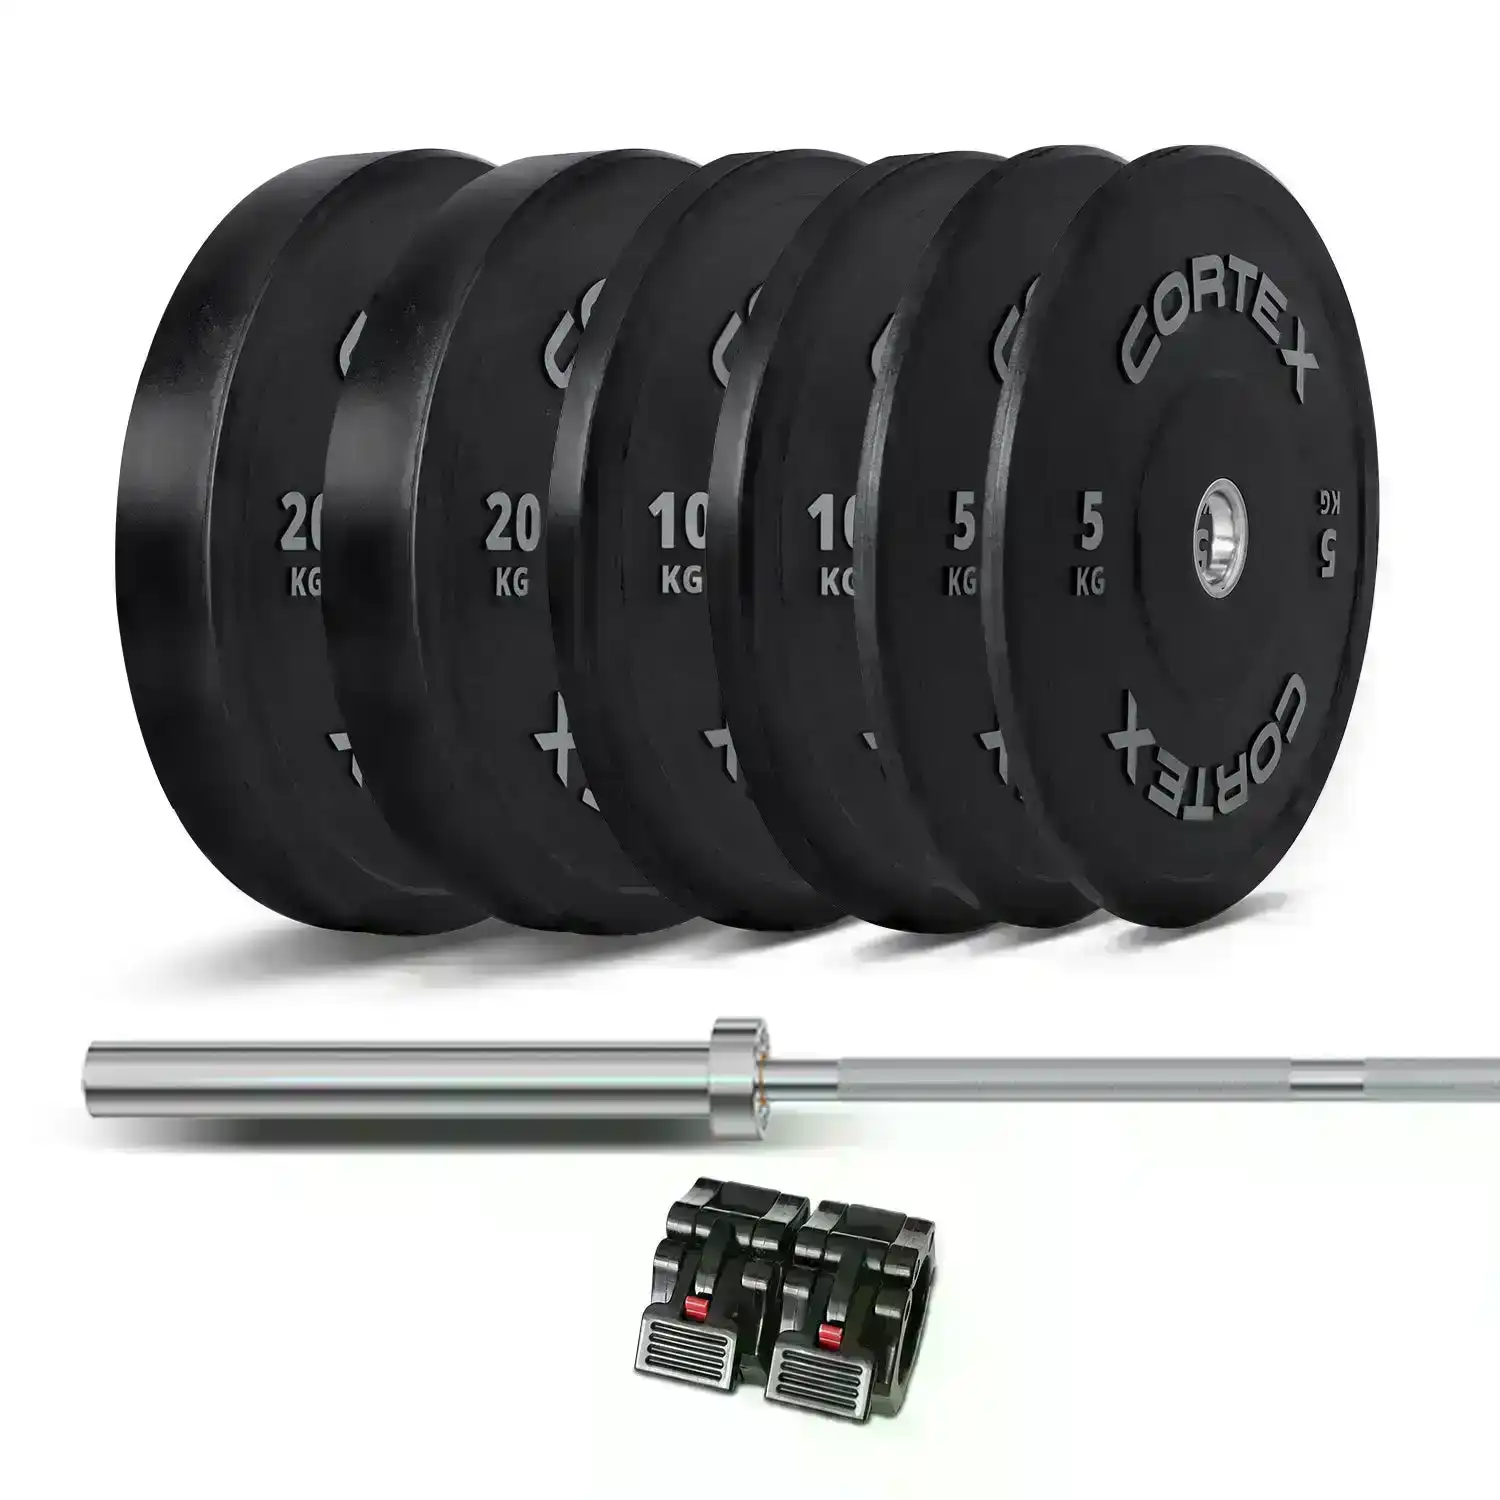 Cortex Starter 85kg Black Series Bumper Plate V2 Package with SPARTAN200 Barbell